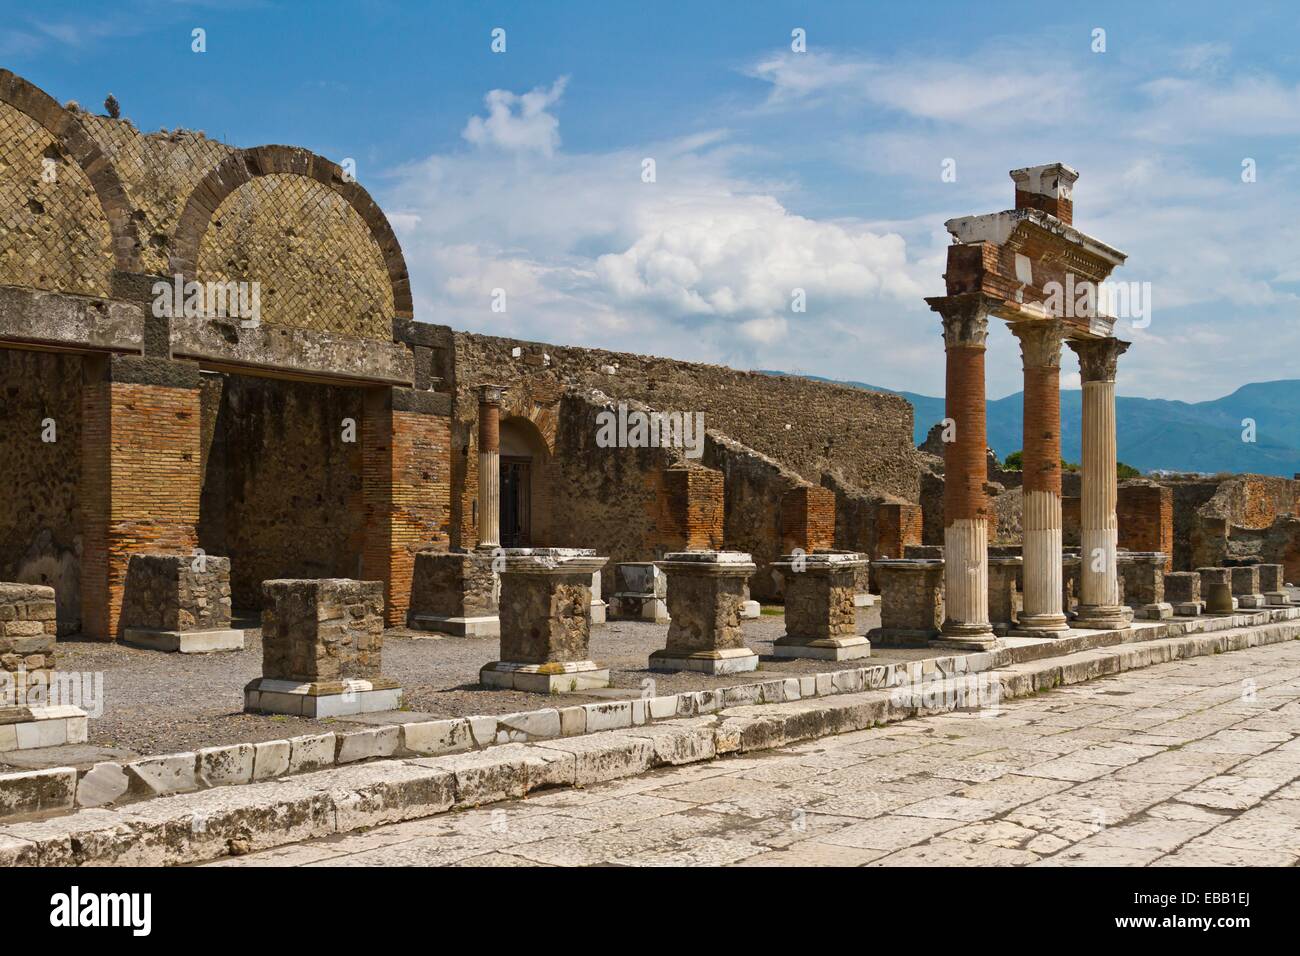 The Forum in the ruins of Pompeii, Italy Stock Photo